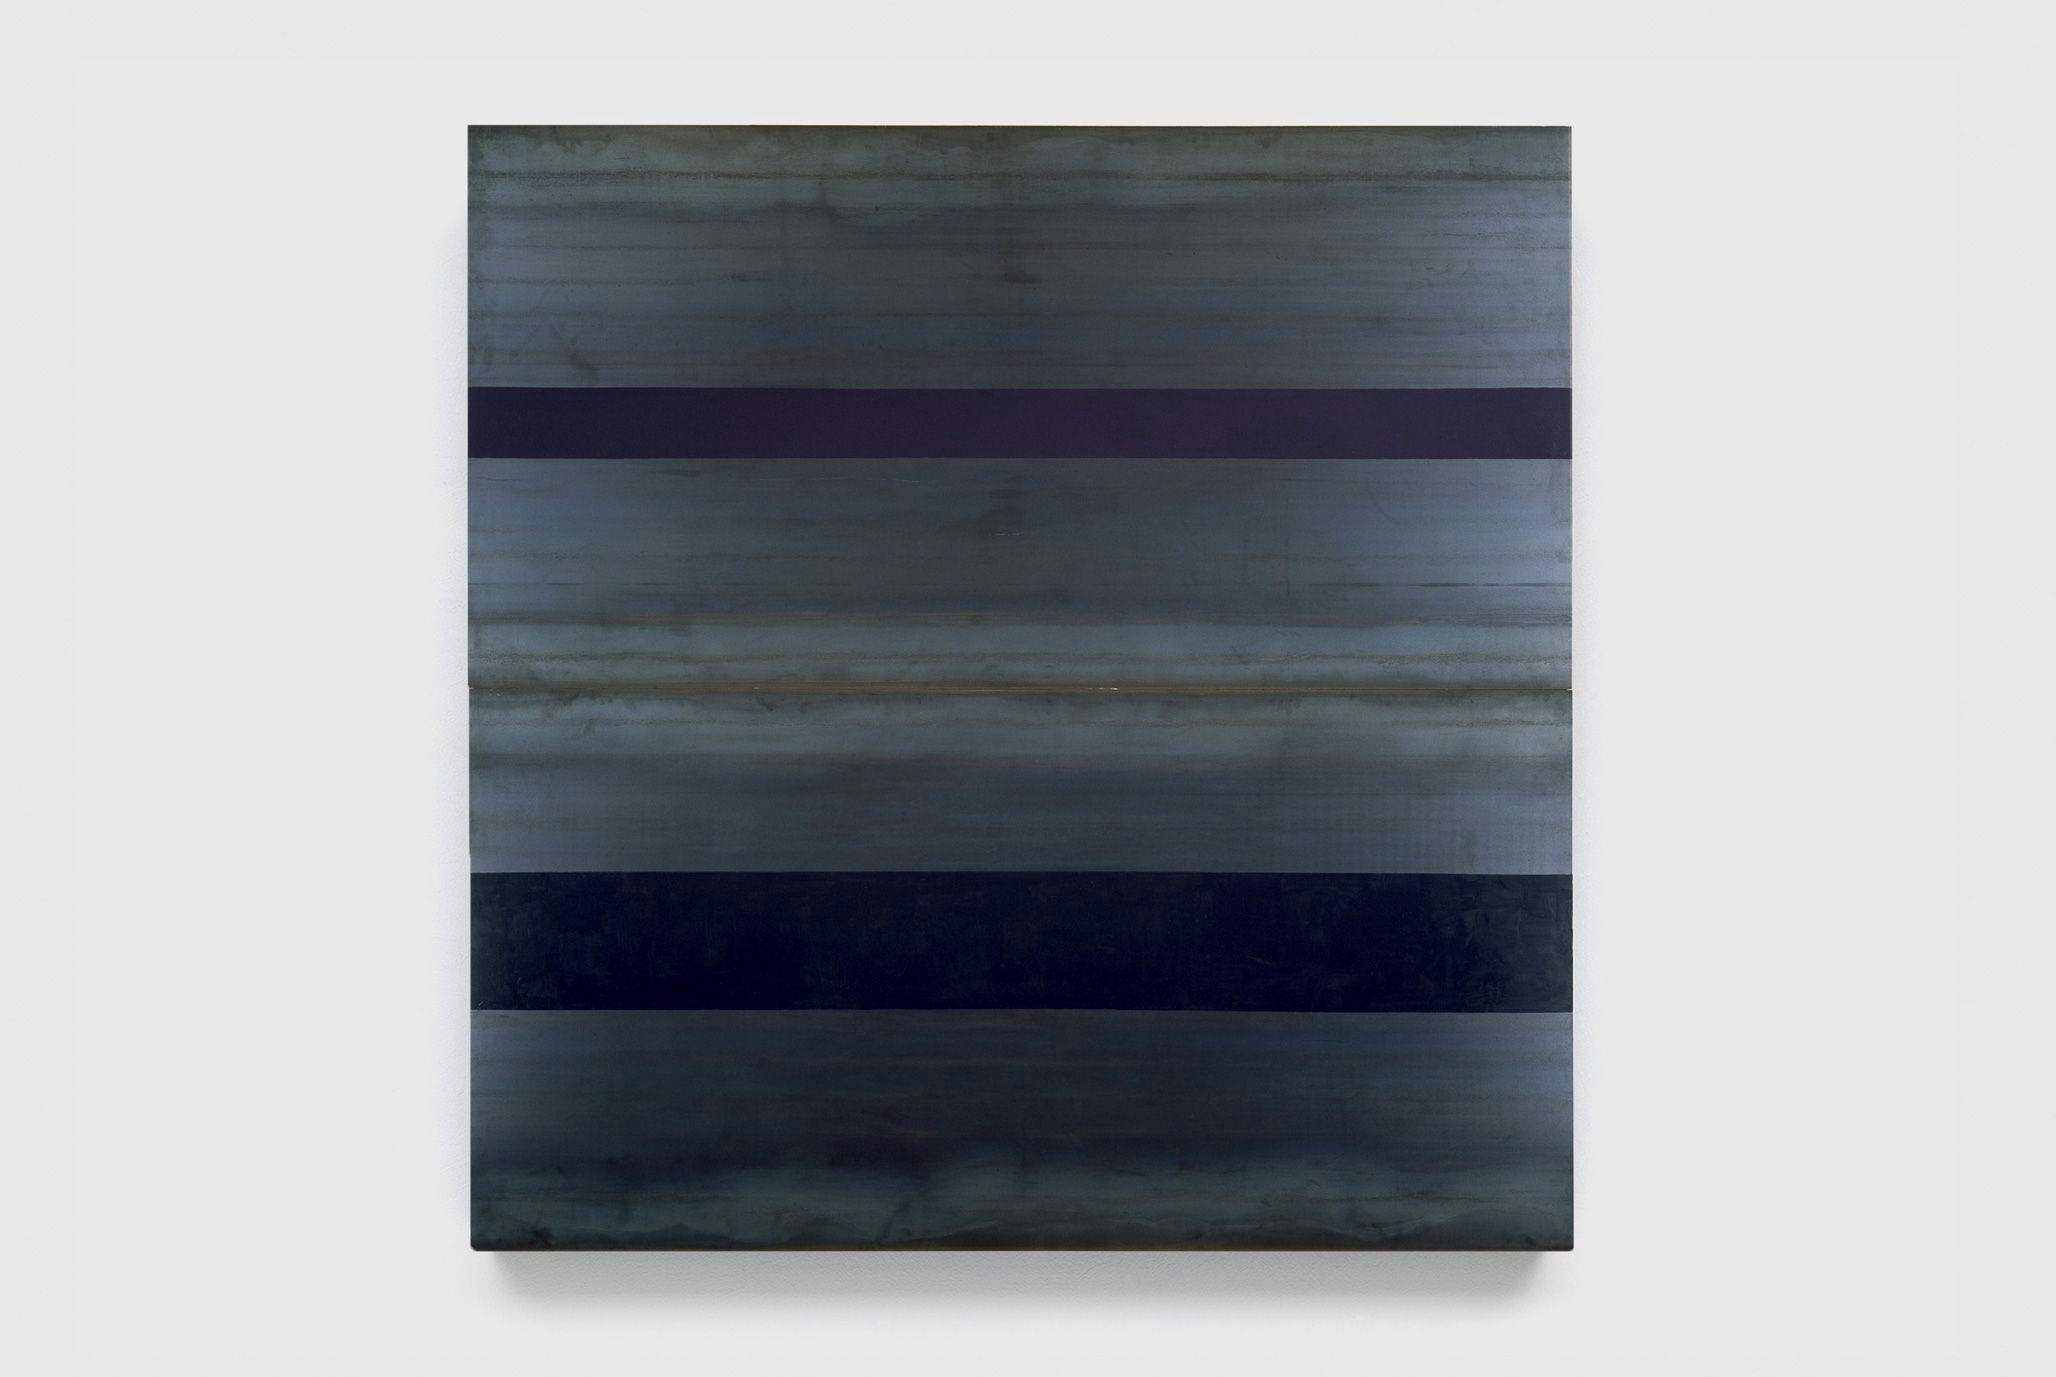 A steel painting by Merrill Wagner titled Silt, dated 1995